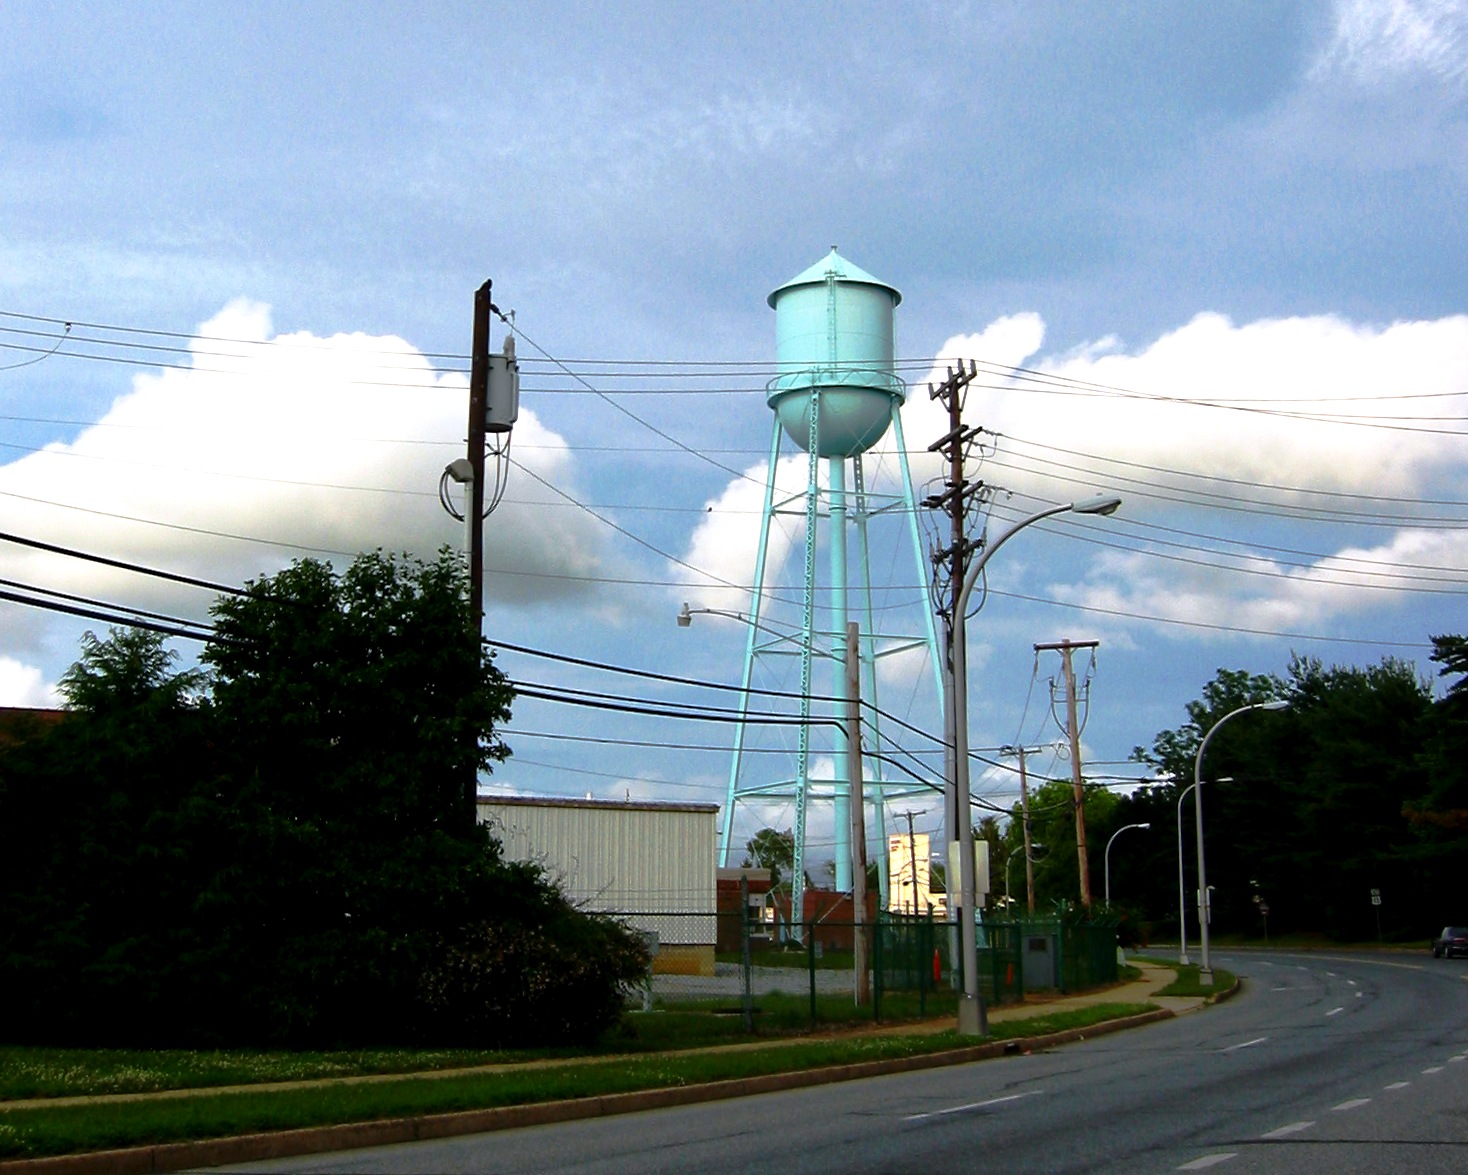 A view of an industrial water tank on a tower over a road that runs next to a warehouse.